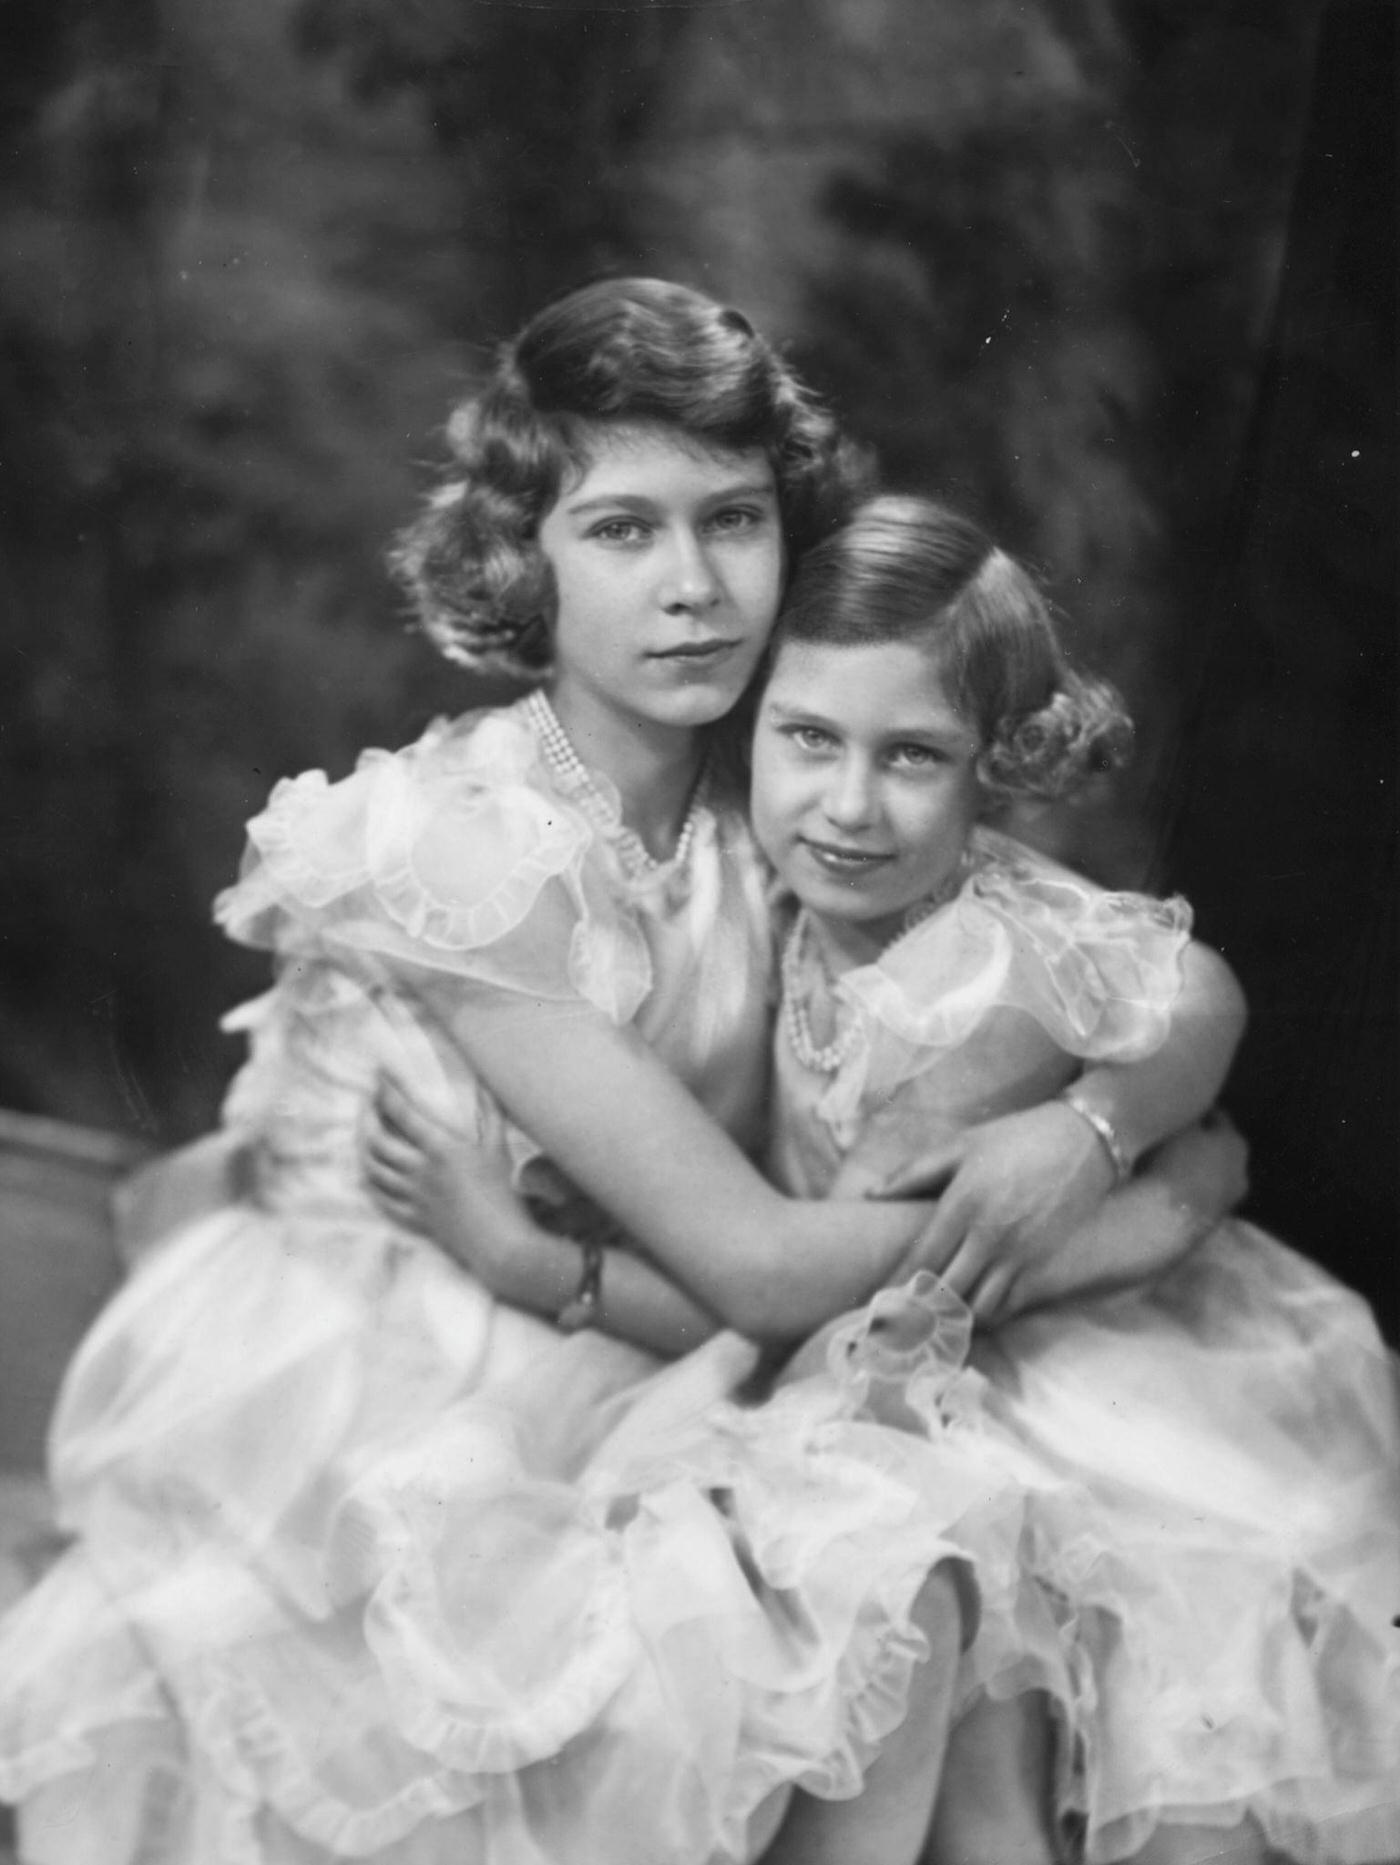 Princesses Elizabeth and Margaret with their arms around each other, 1939.